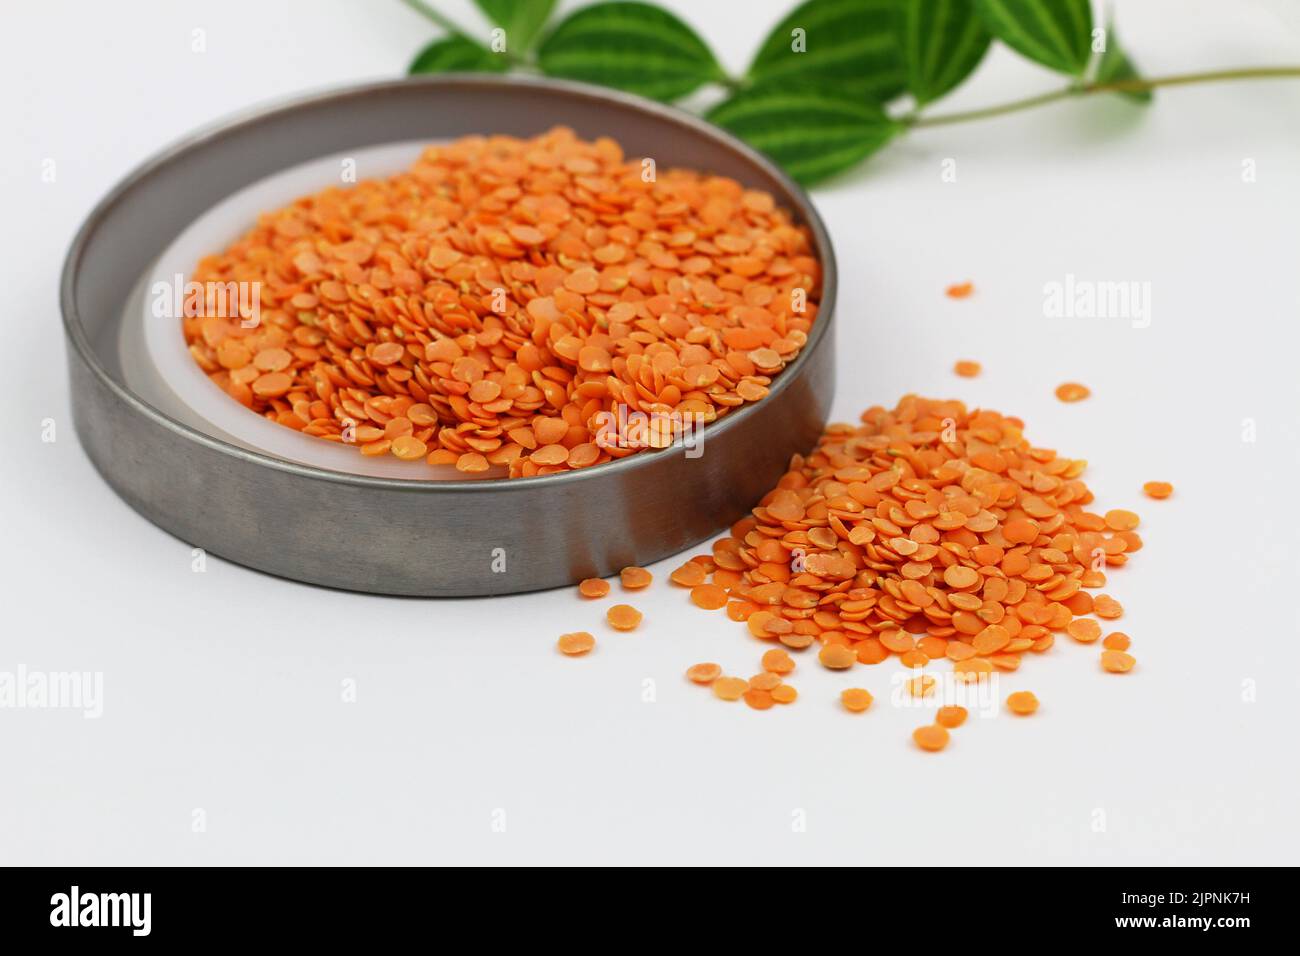 Uncooked red lentils in aluminium dish on white surface Stock Photo